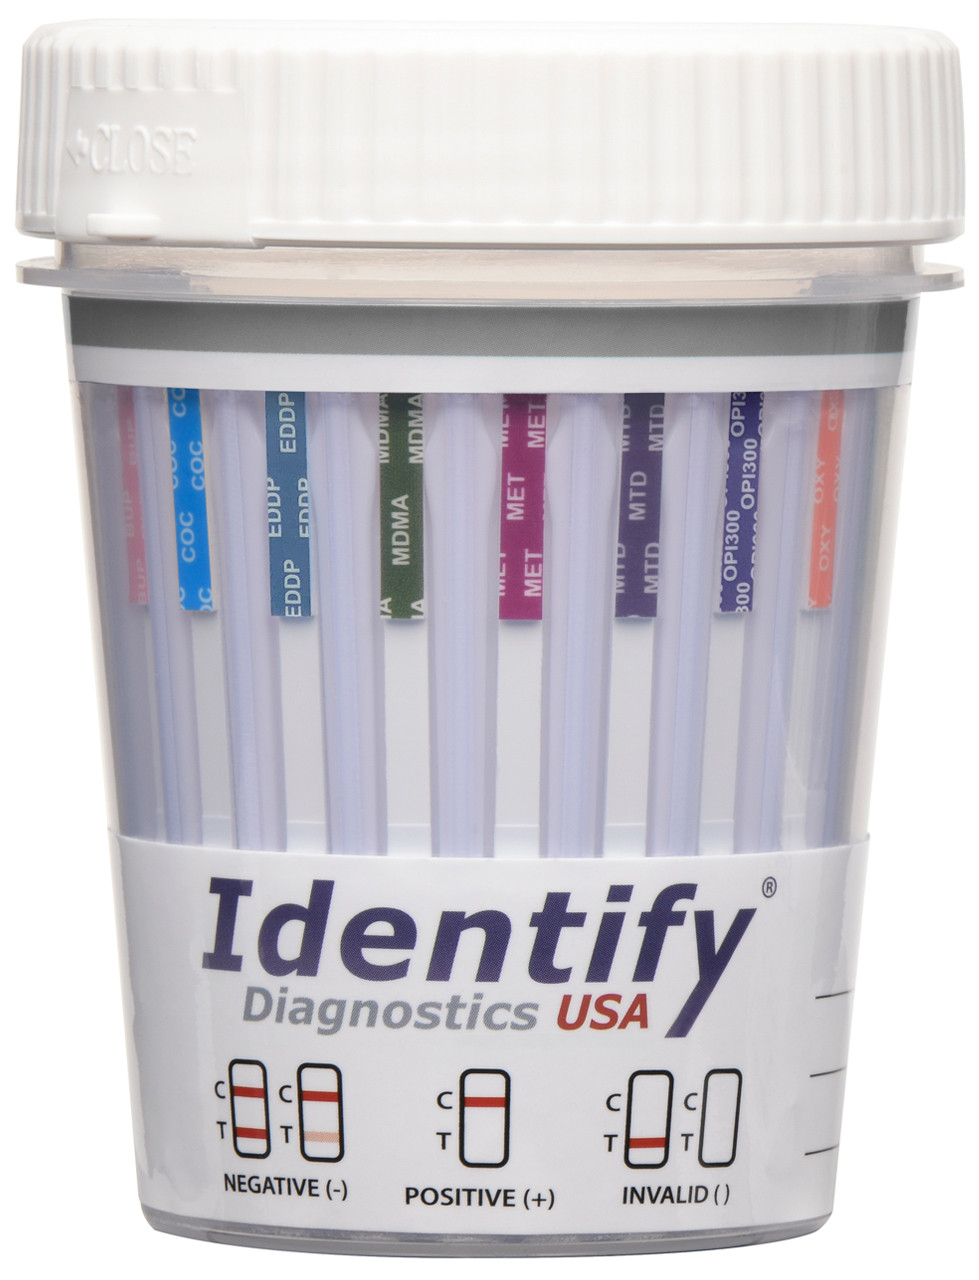 Identify Diagnostics USA 14 Panel Drug Test Cup with BUP & 6 Adulterants